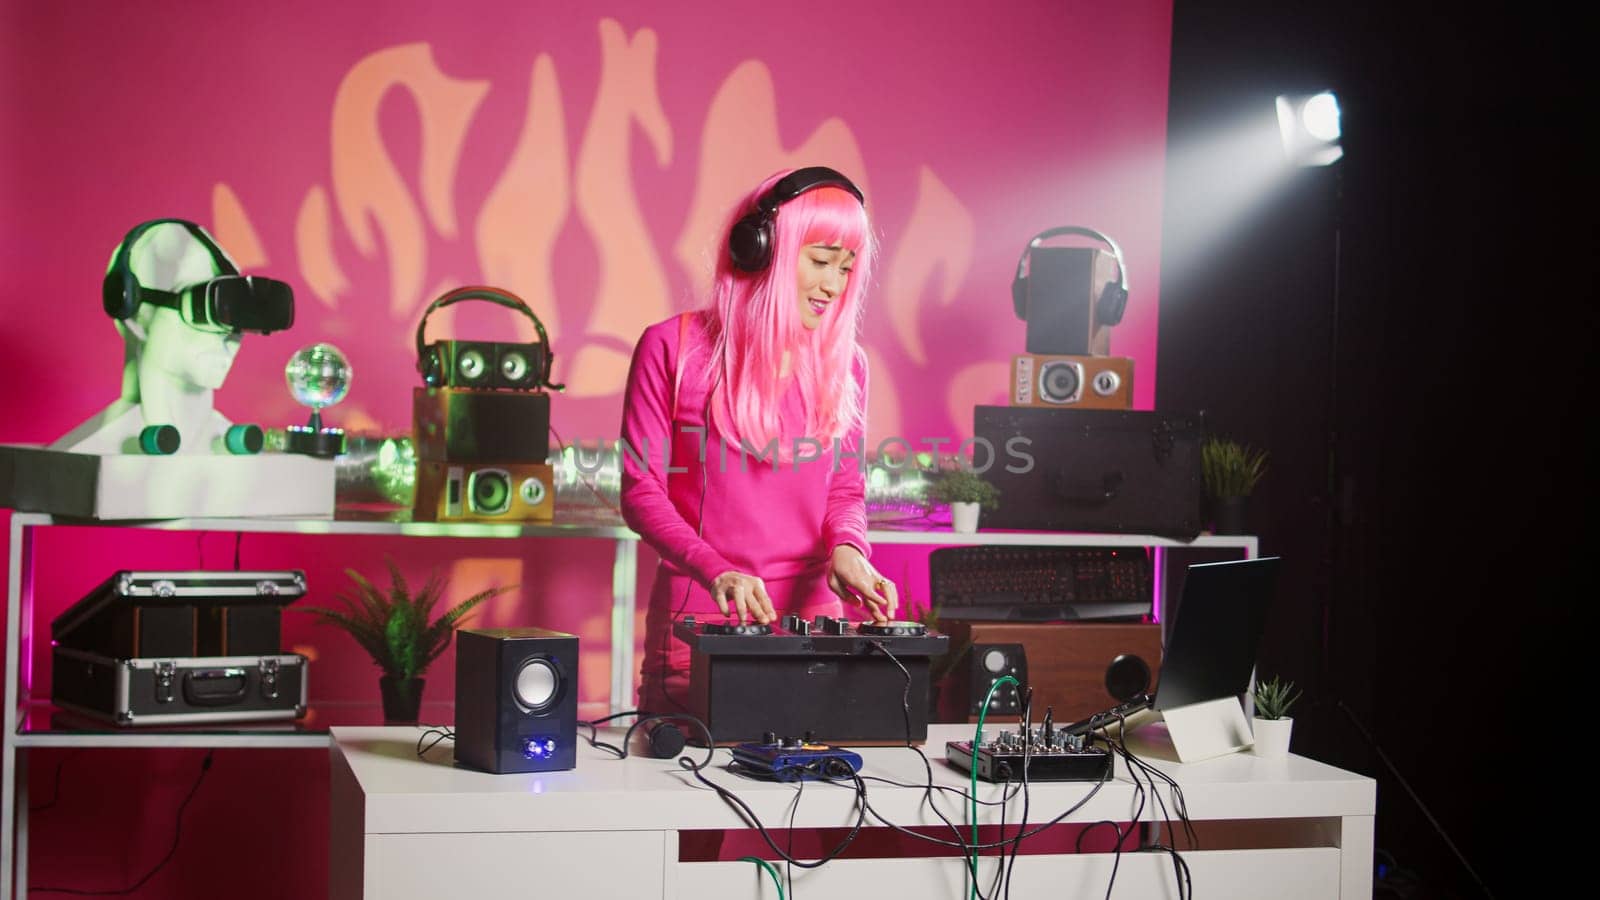 Smiling dj artist wearing headphones during performance, mixing eletronic sound with techno playing music at professional mixer console. Musician enjoying partying at night in club